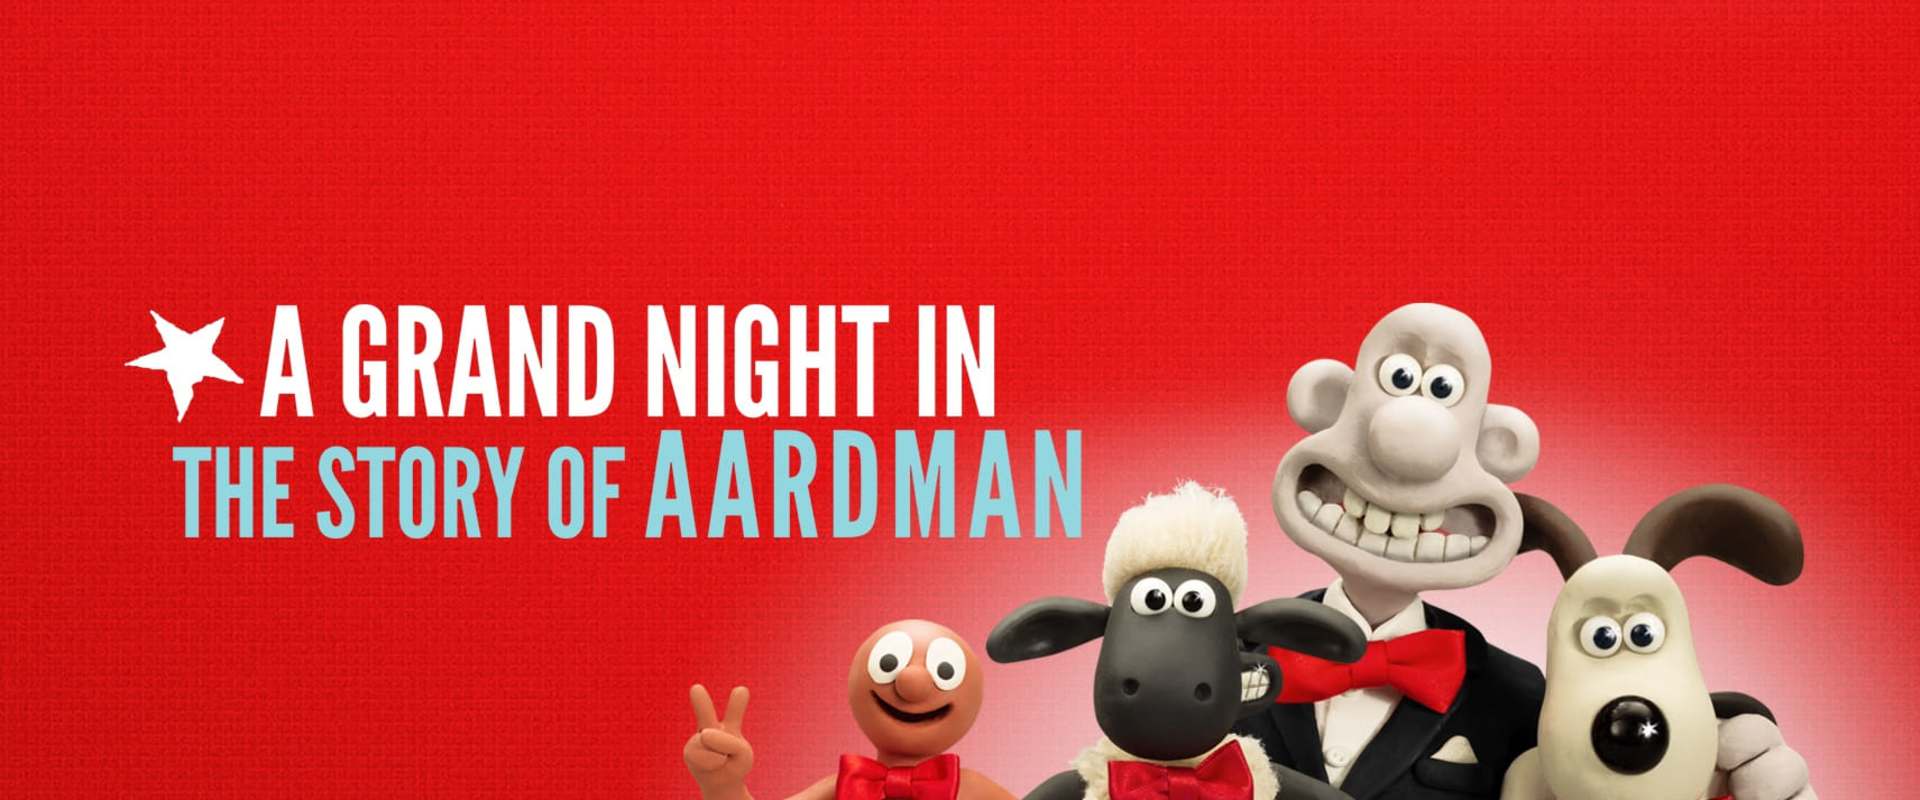 A Grand Night In: The Story of Aardman background 1